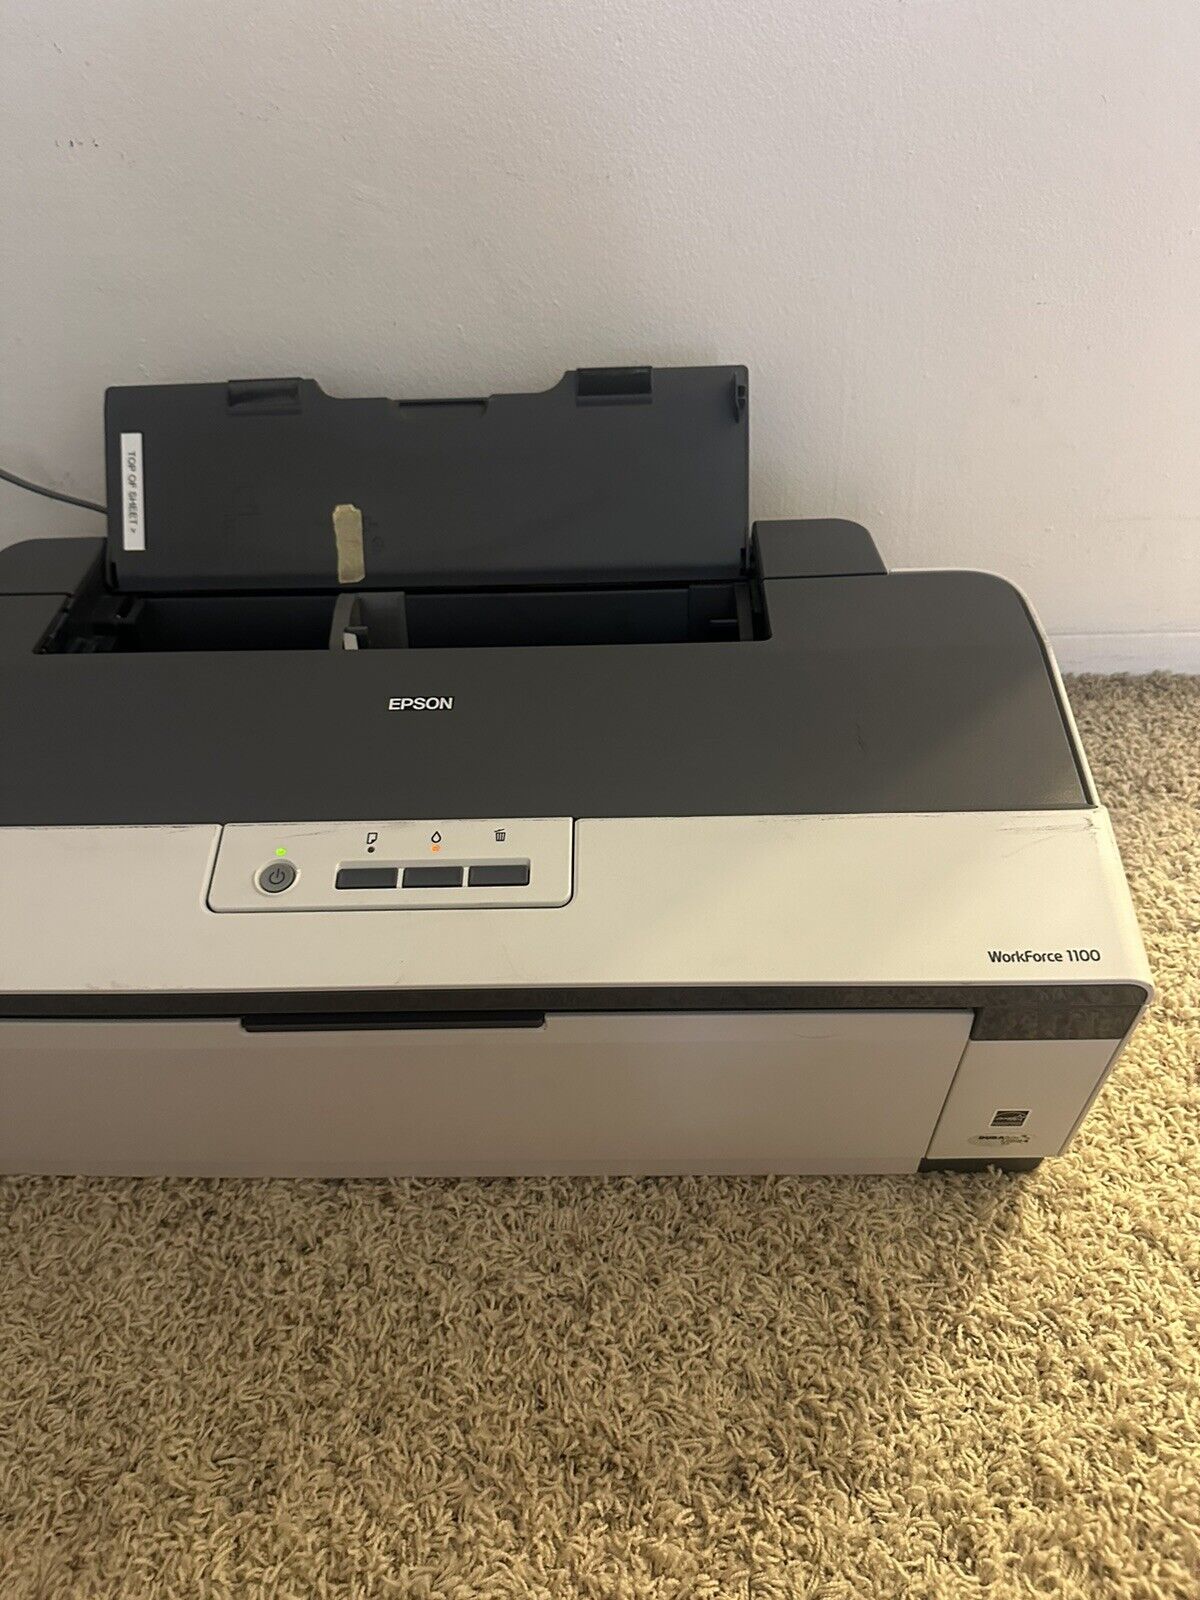 Epson WorkForce 1100 Workgroup Large Format Printer Prints up to 13x19